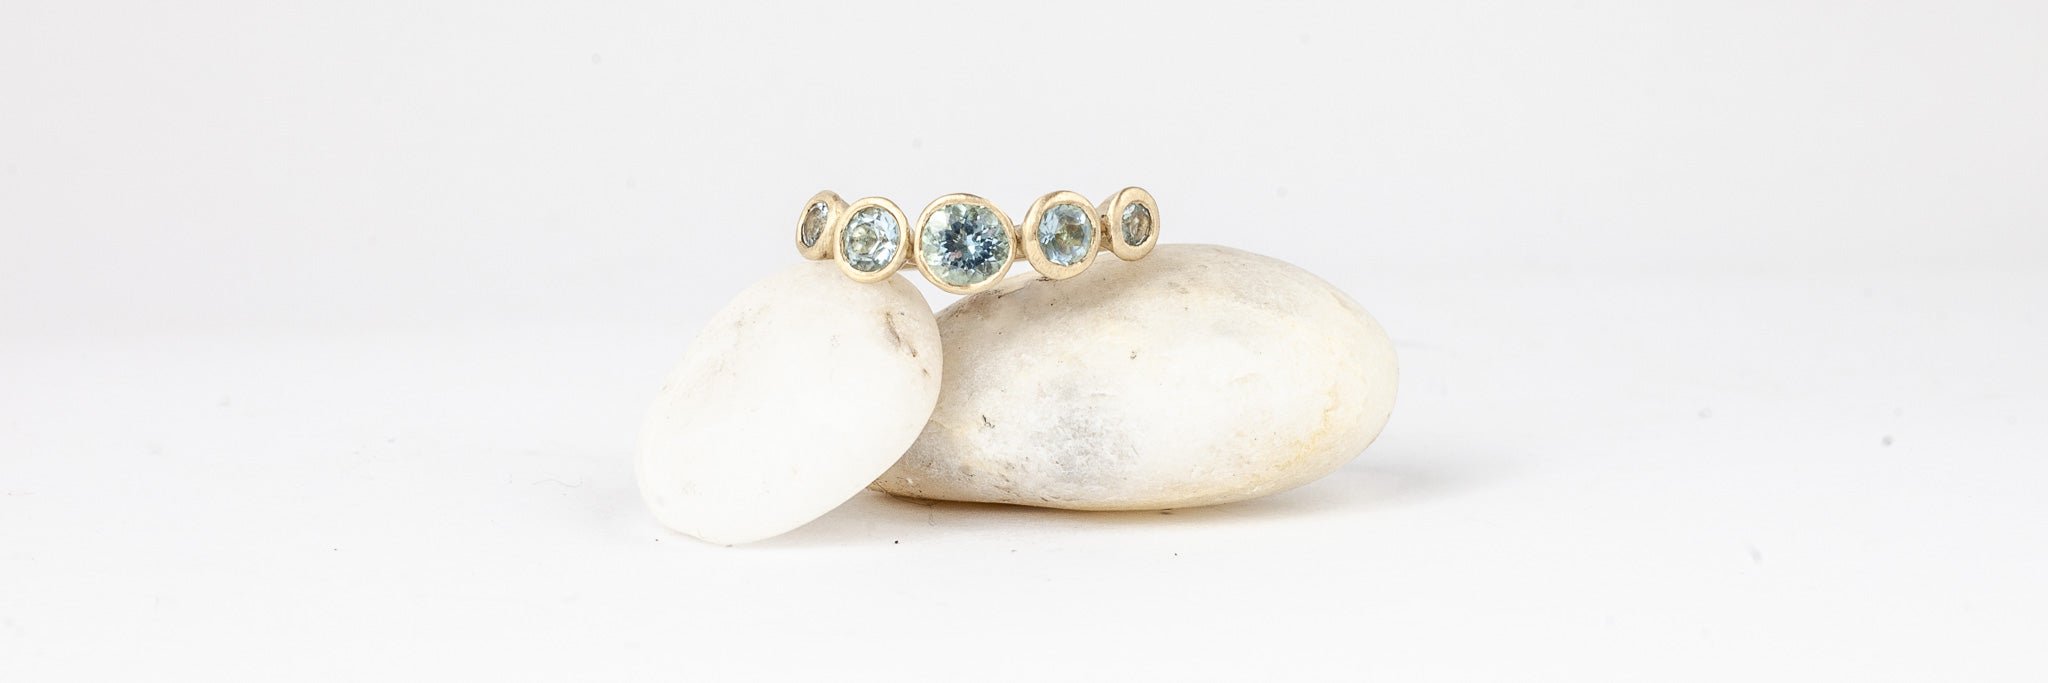 Handmade Engagement Rings, in 18ct gold, unique ethically made ring designs set with precious stones and diamonds rings